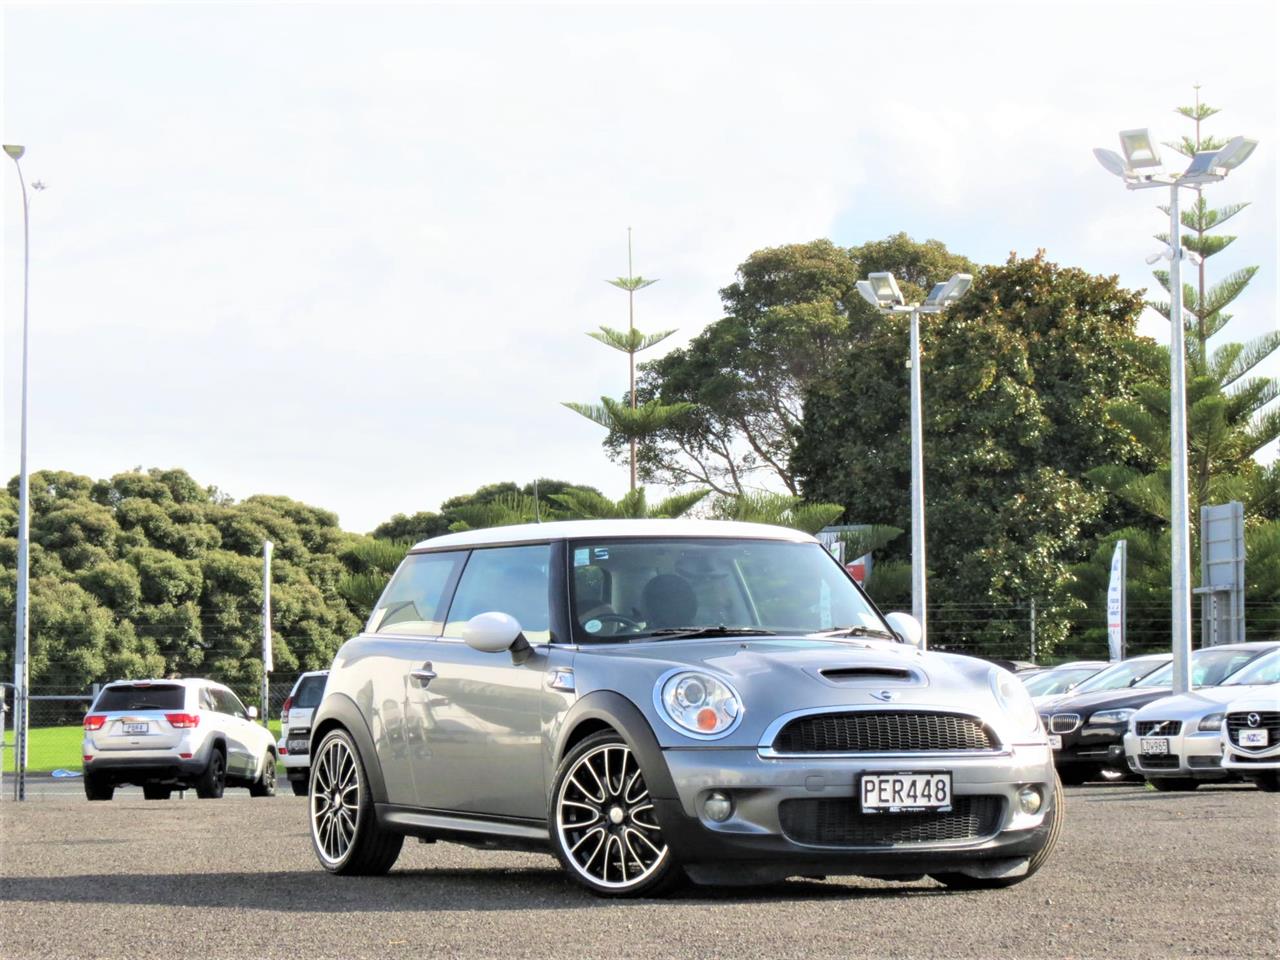 NZC 2007 Mini Cooper just arrived to Auckland